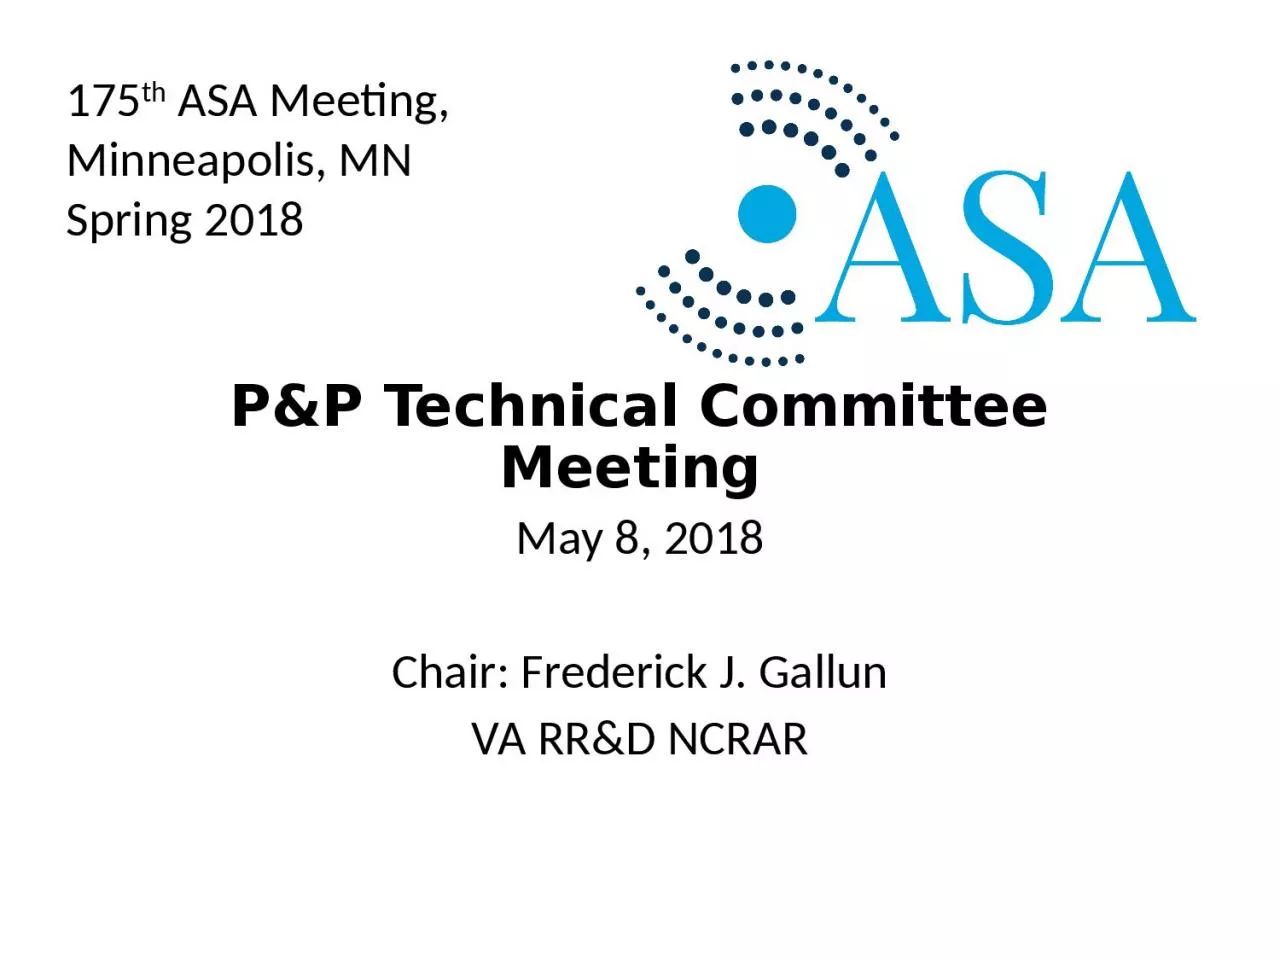 P&P Technical Committee Meeting